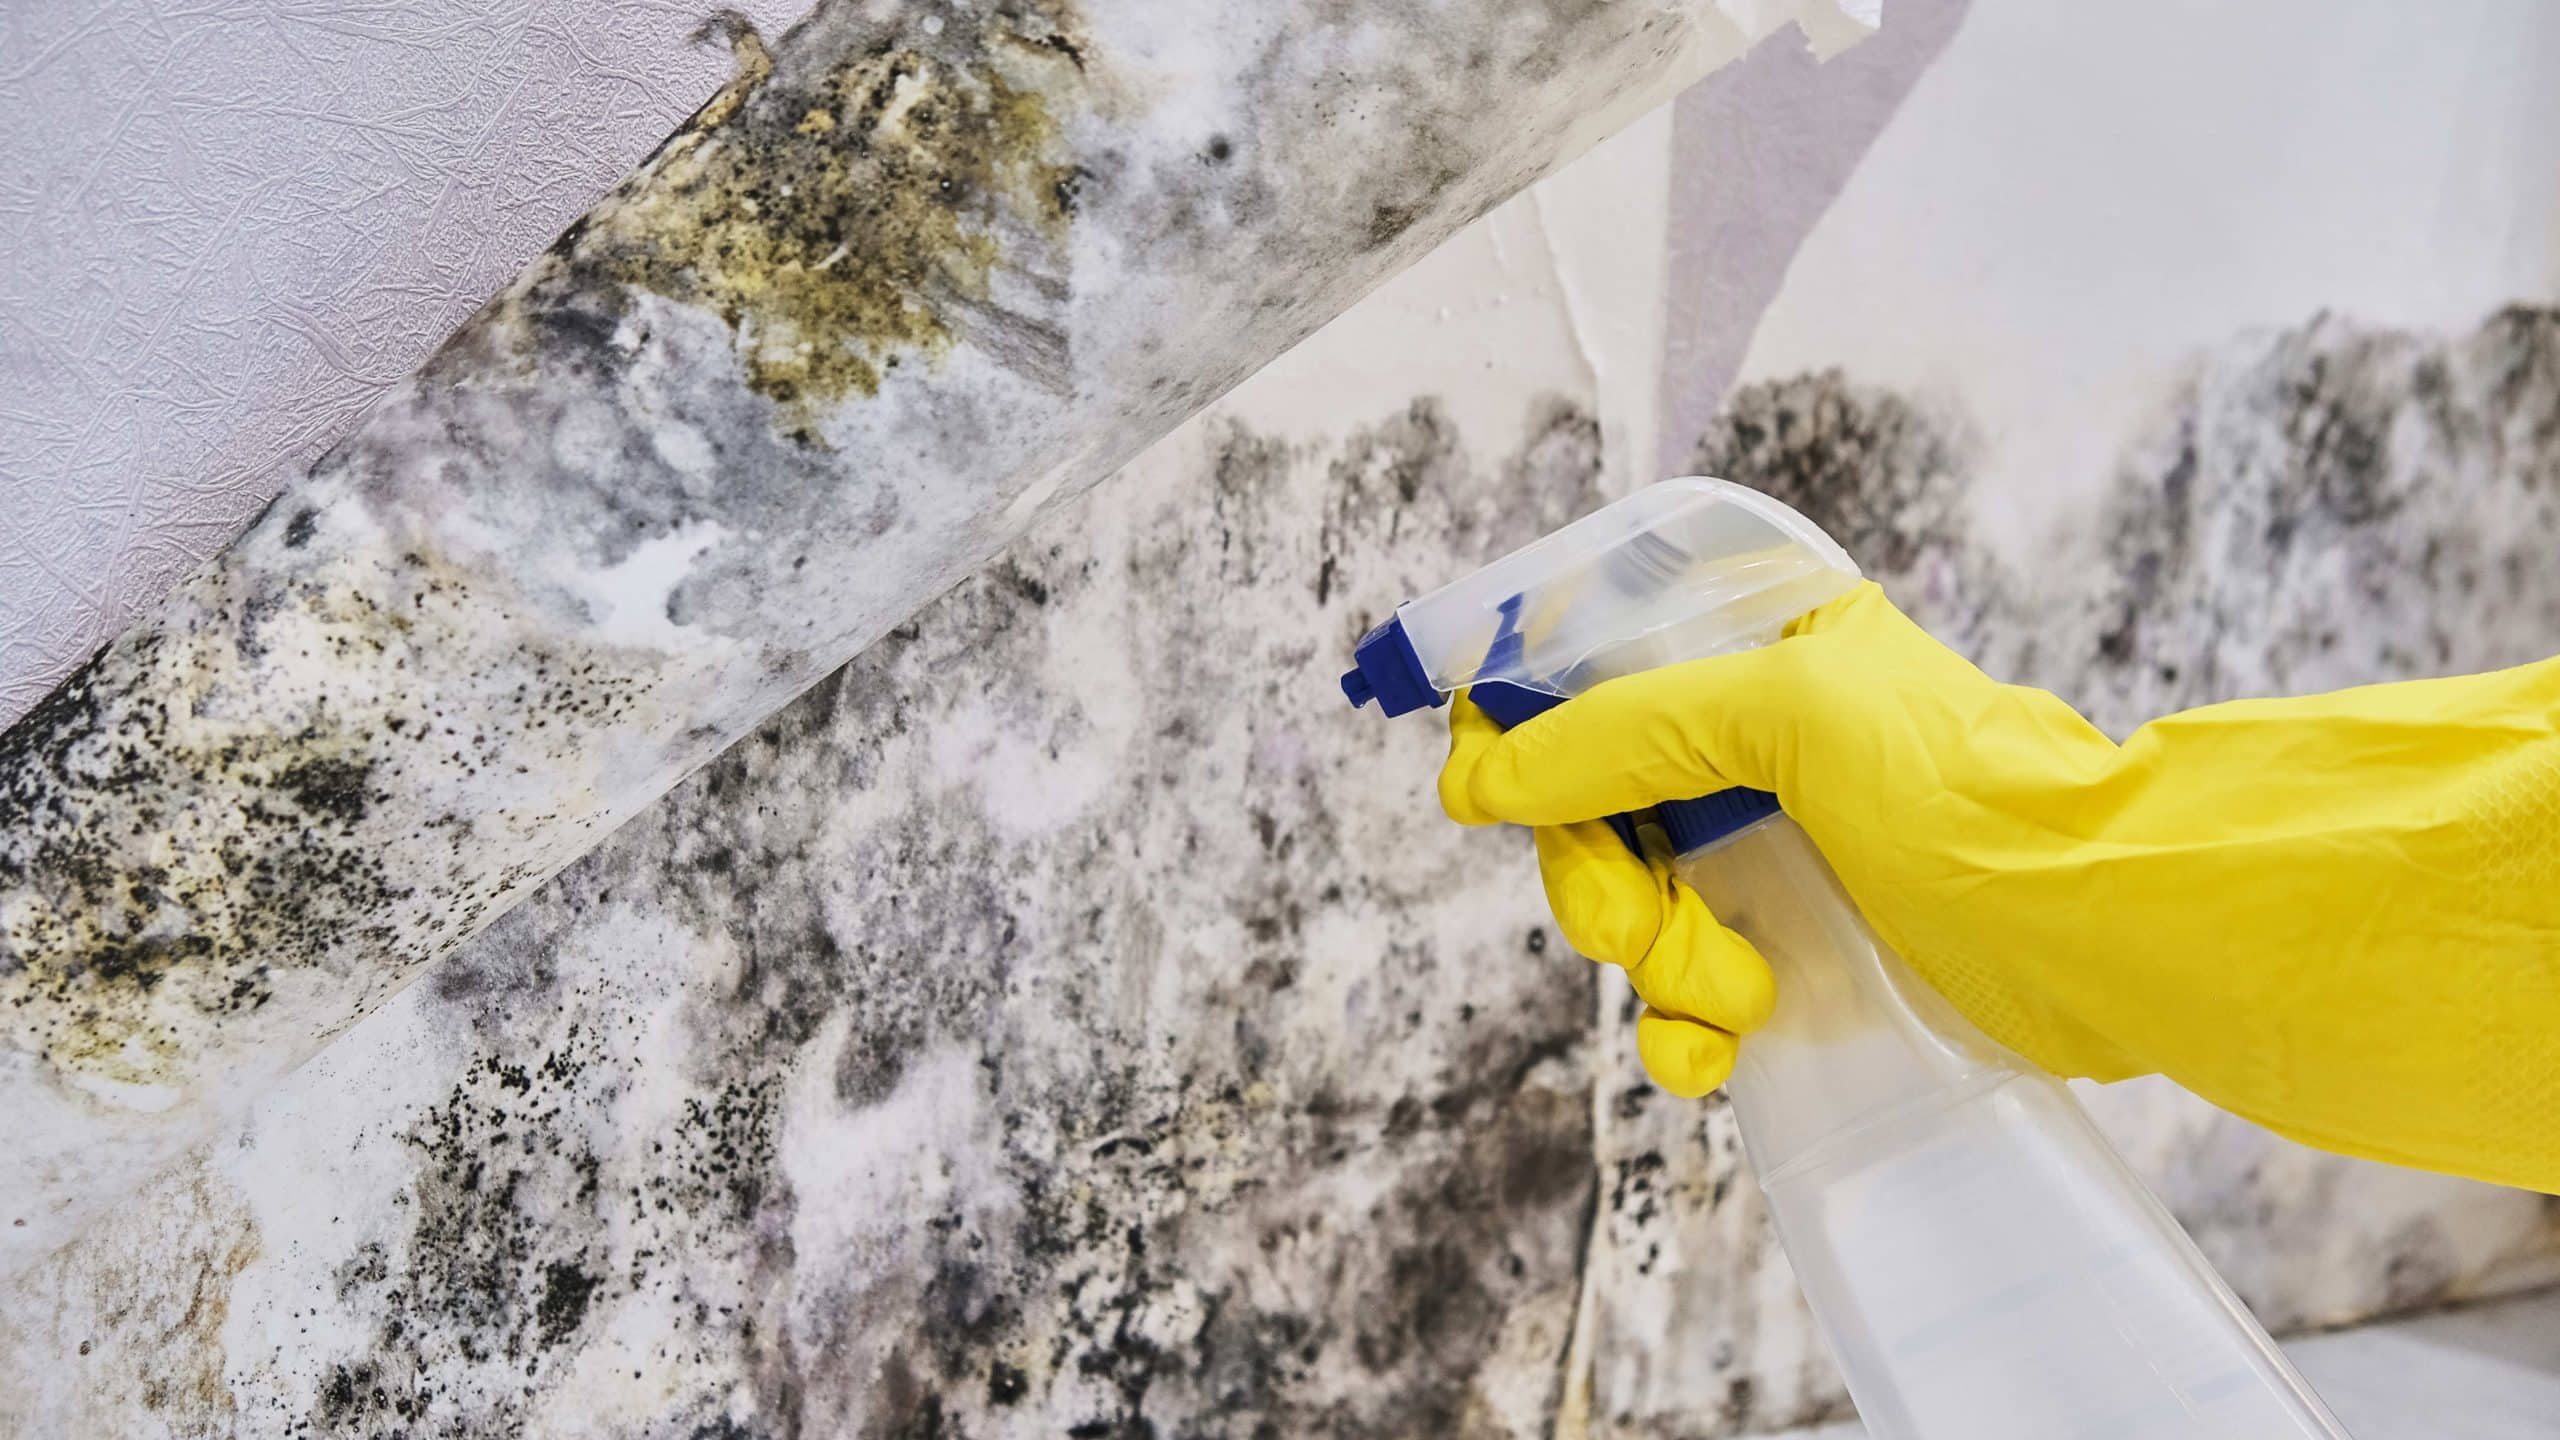 Gloved person spraying mold with a cleaner